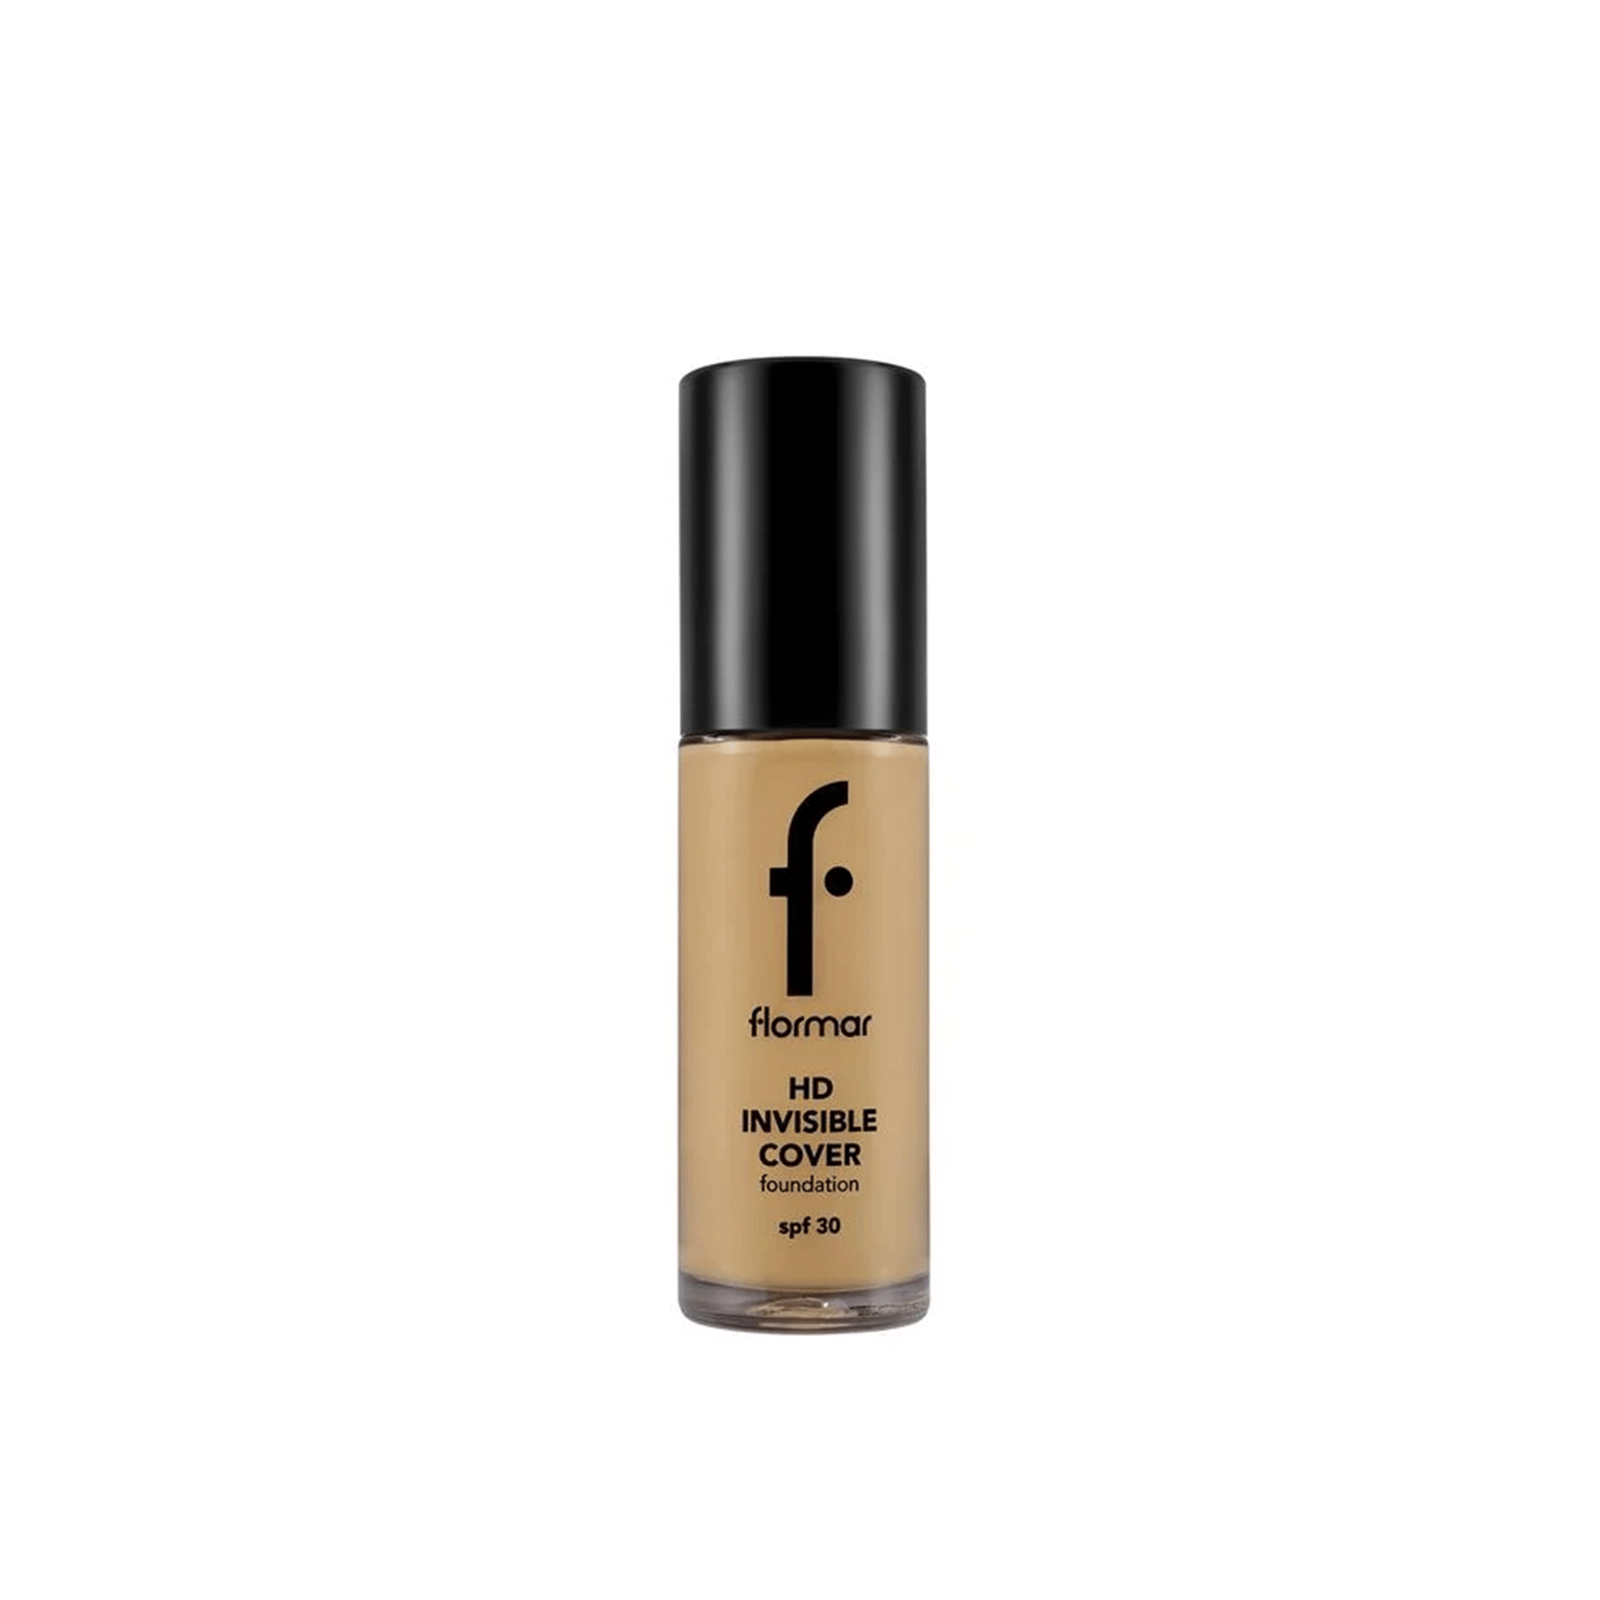 Flormar Invisible Cover HD Foundation SPF30 110 Golden Beige 30ml (1.01floz)